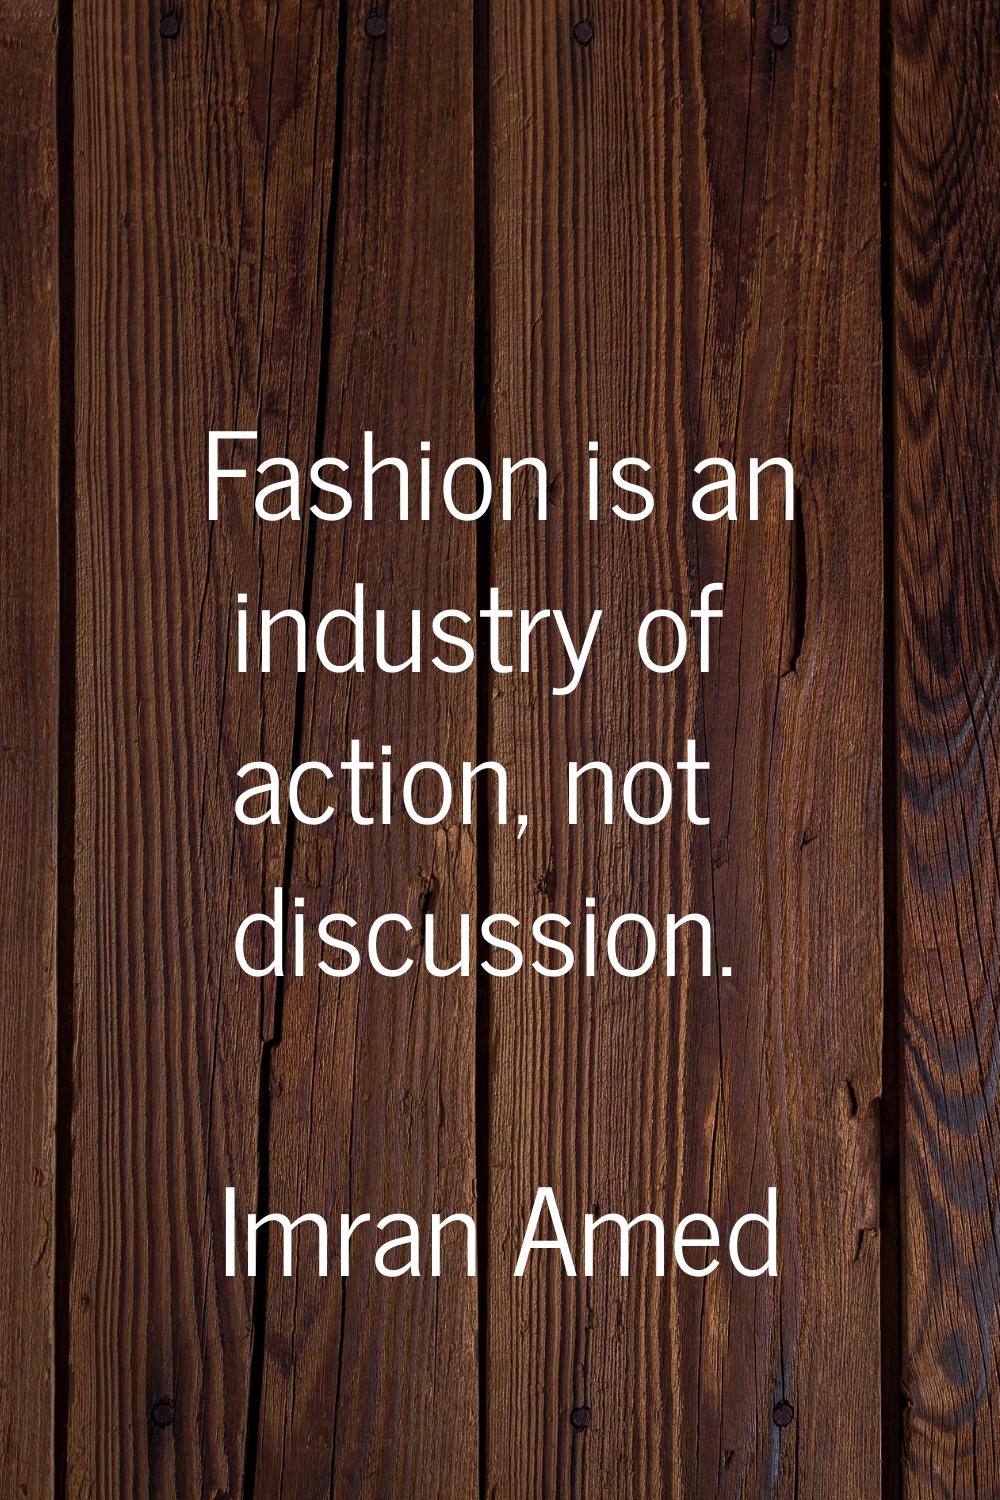 Fashion is an industry of action, not discussion.